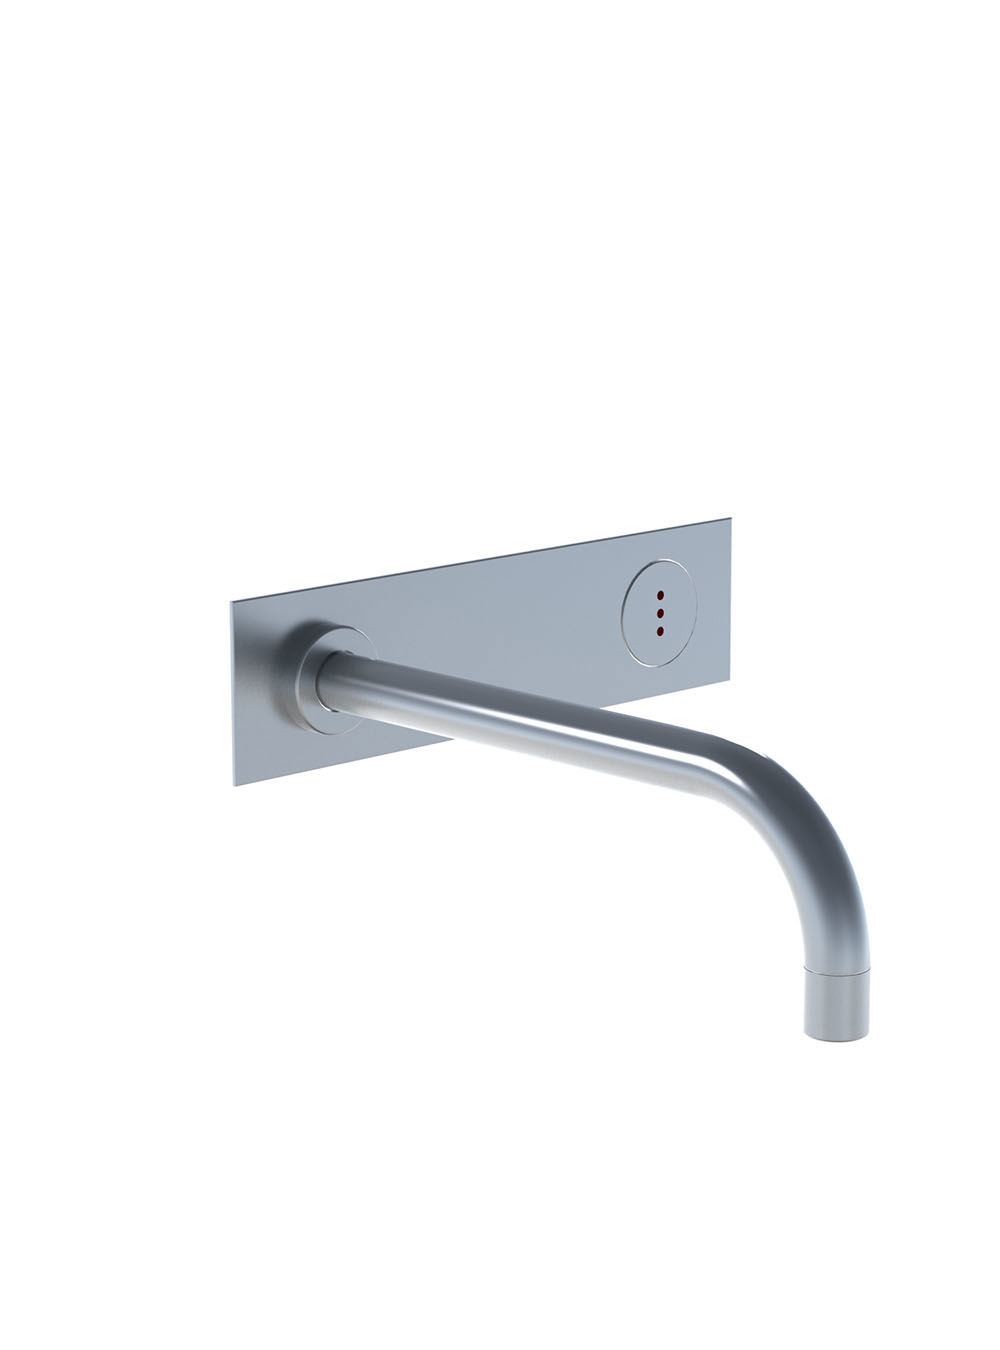 4822: Build-in basin tap with on-off sensor for ‘hands free’ operation. Sensor aligned with wall. Valve bo